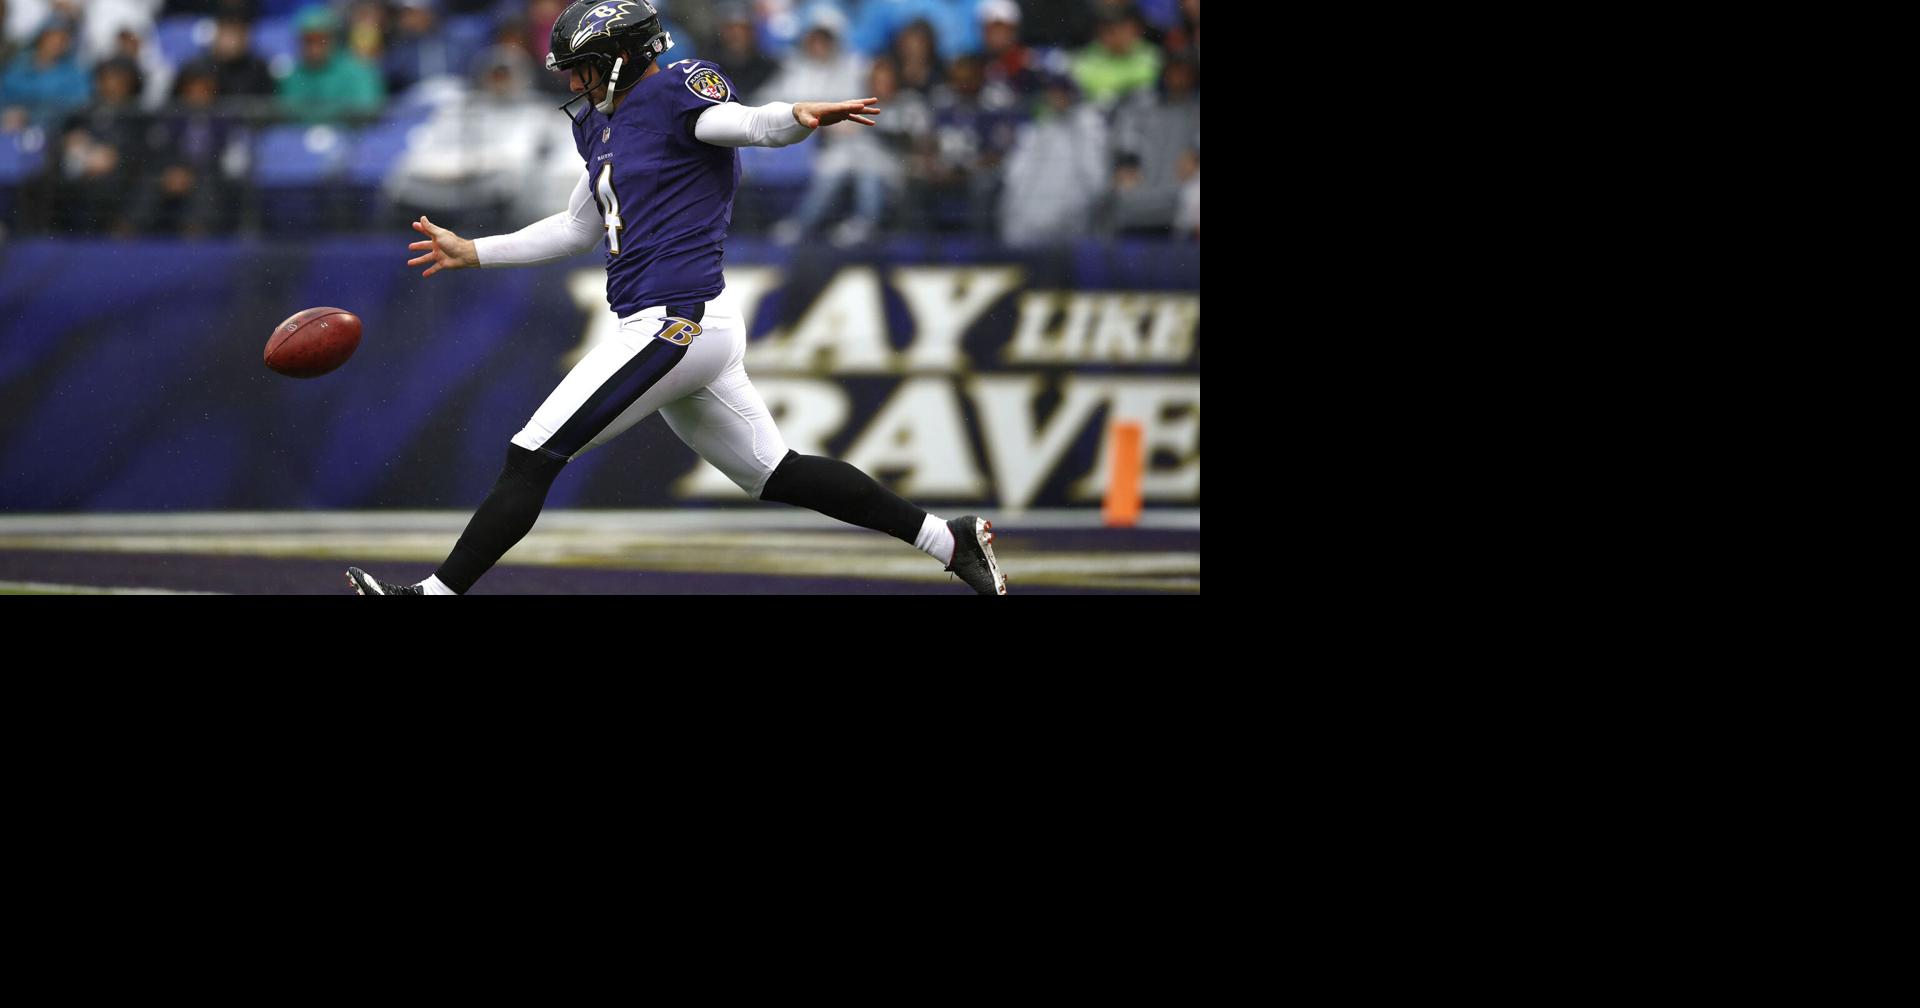 Terrell Suggs 2012 Action Poster by Unknown at